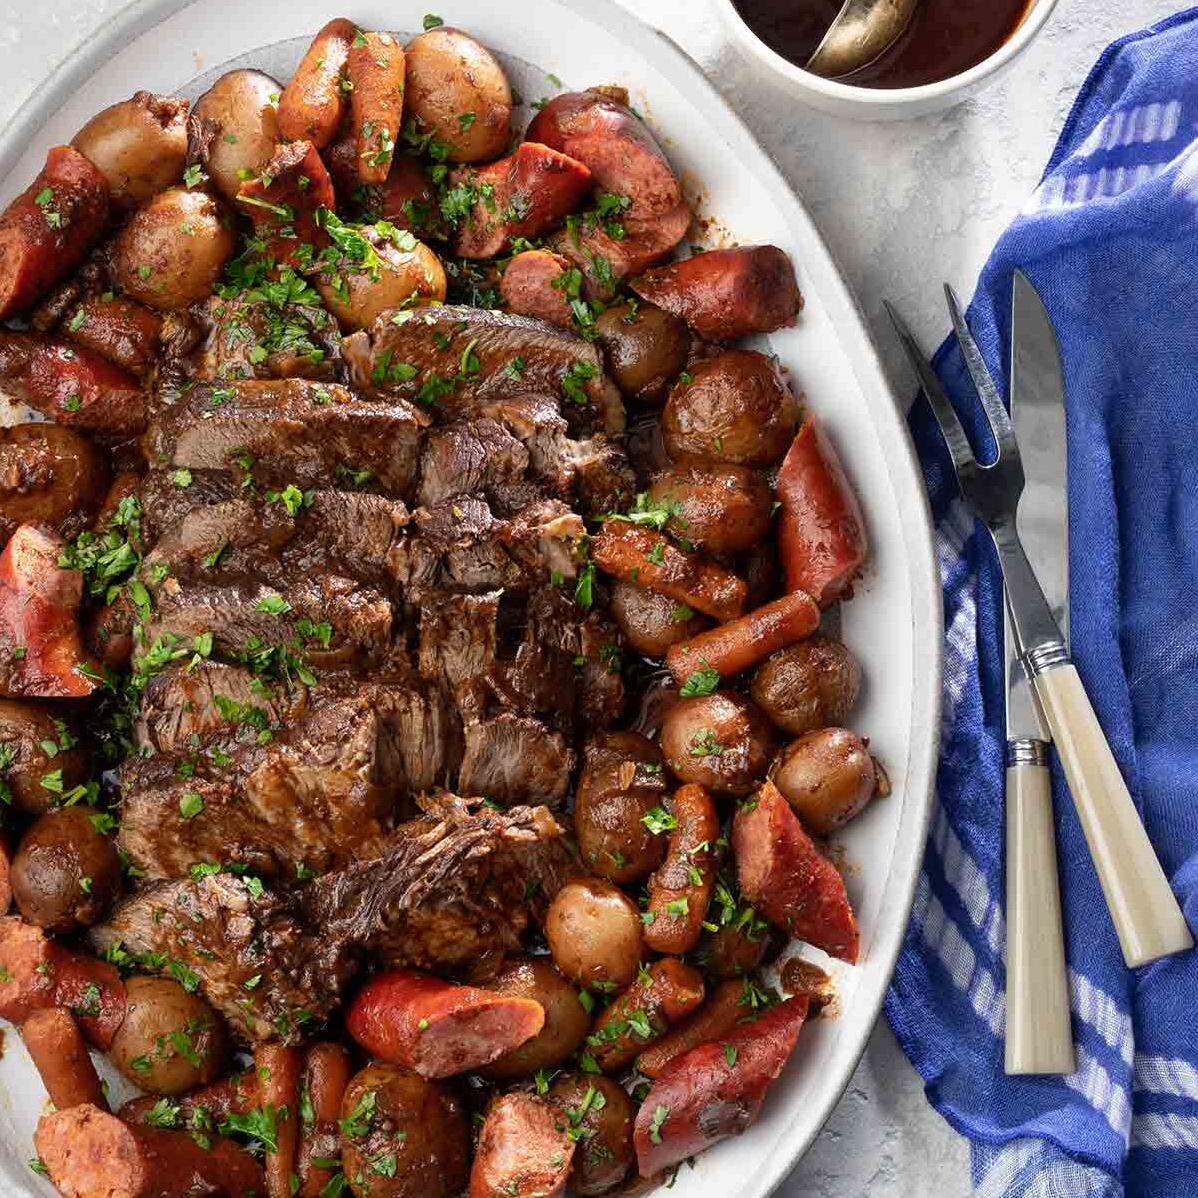  Welcome to the ultimate comfort food: Portuguese Pot Roast in Wine & Garlic!